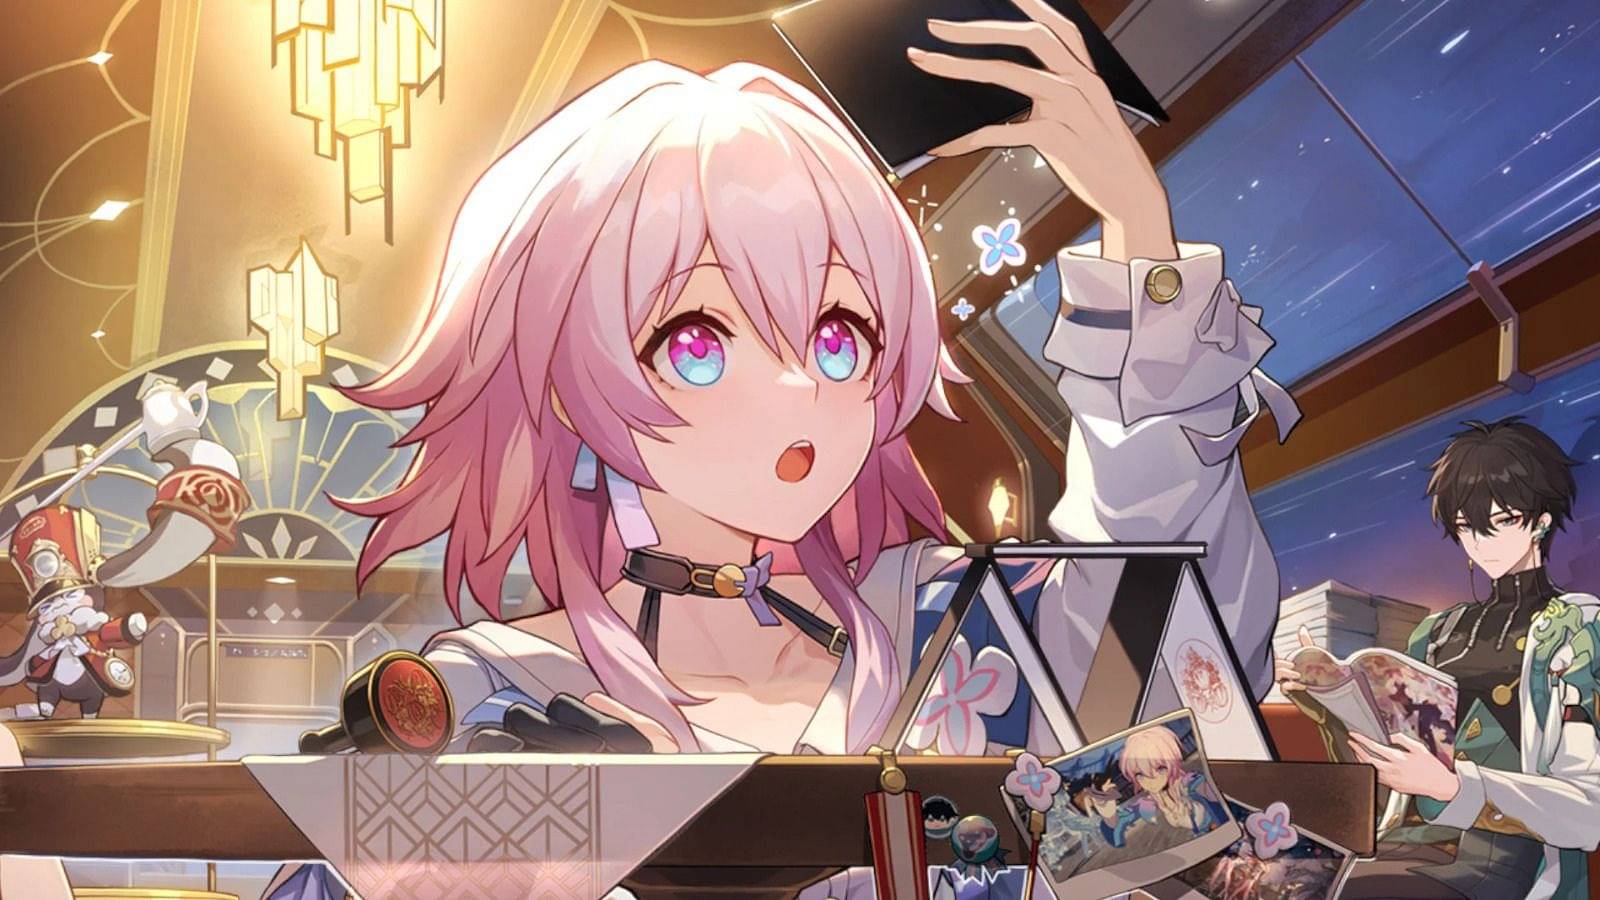 How to redeem Honkai Star Rail codes from website - The SportsRush